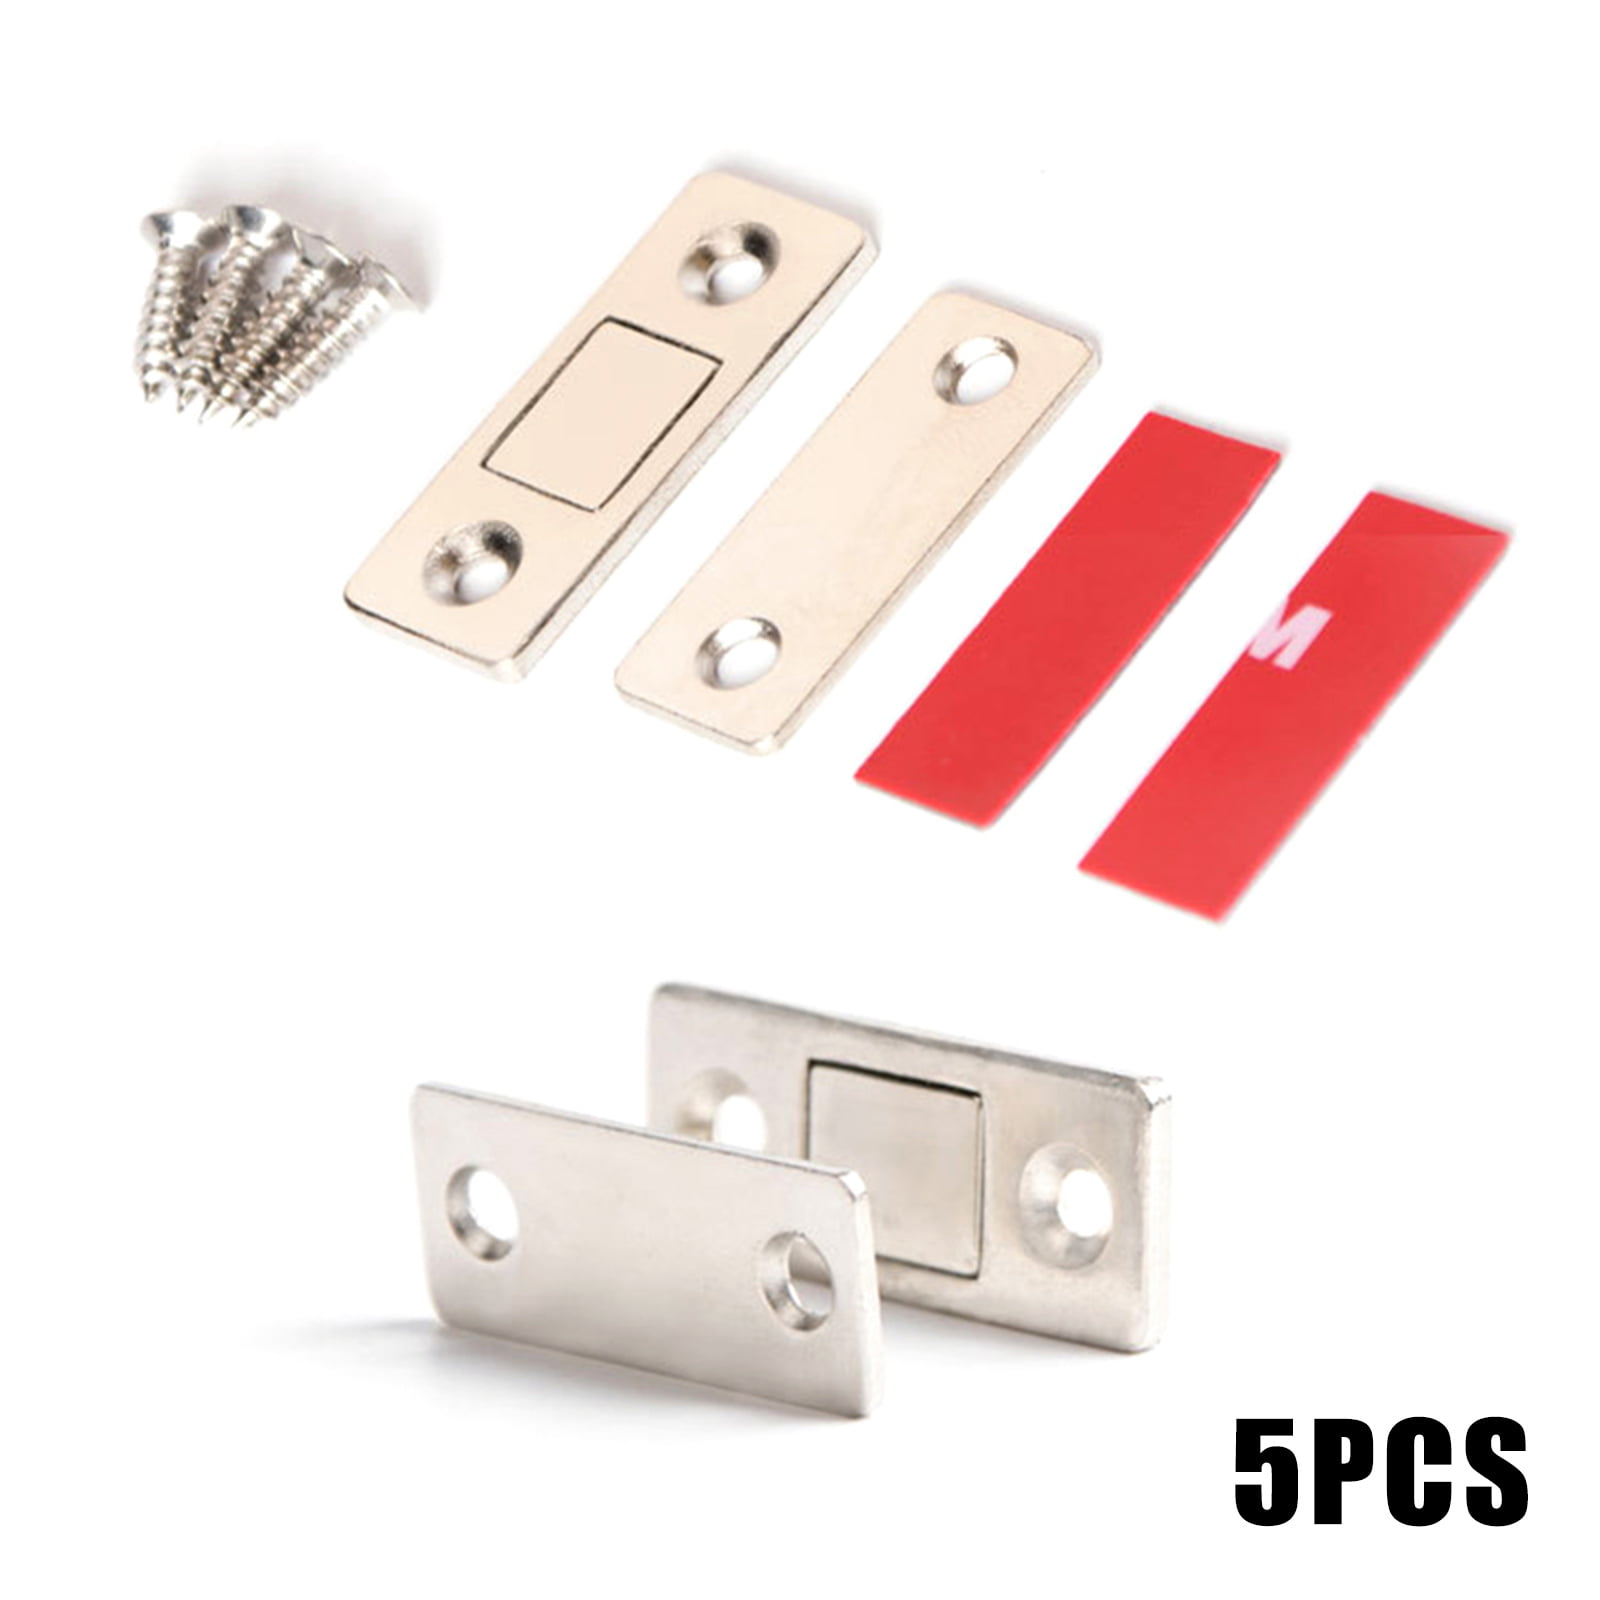 5Pcs Magnetic Door Catch for Kitchen Cabinet Cupboard Wardrobe Drawer Latch 